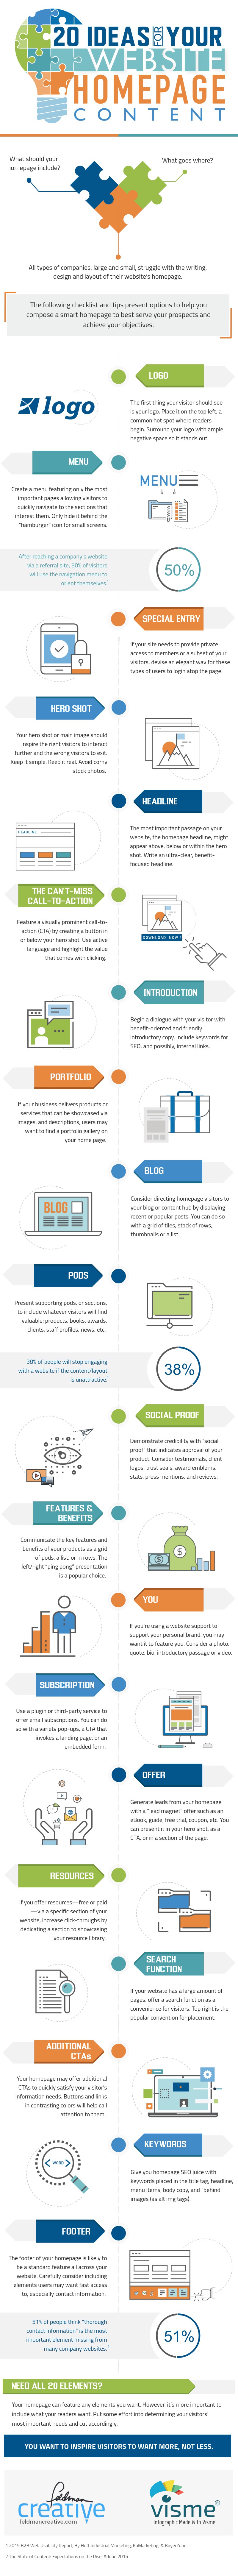 Website Homepage Content infographic